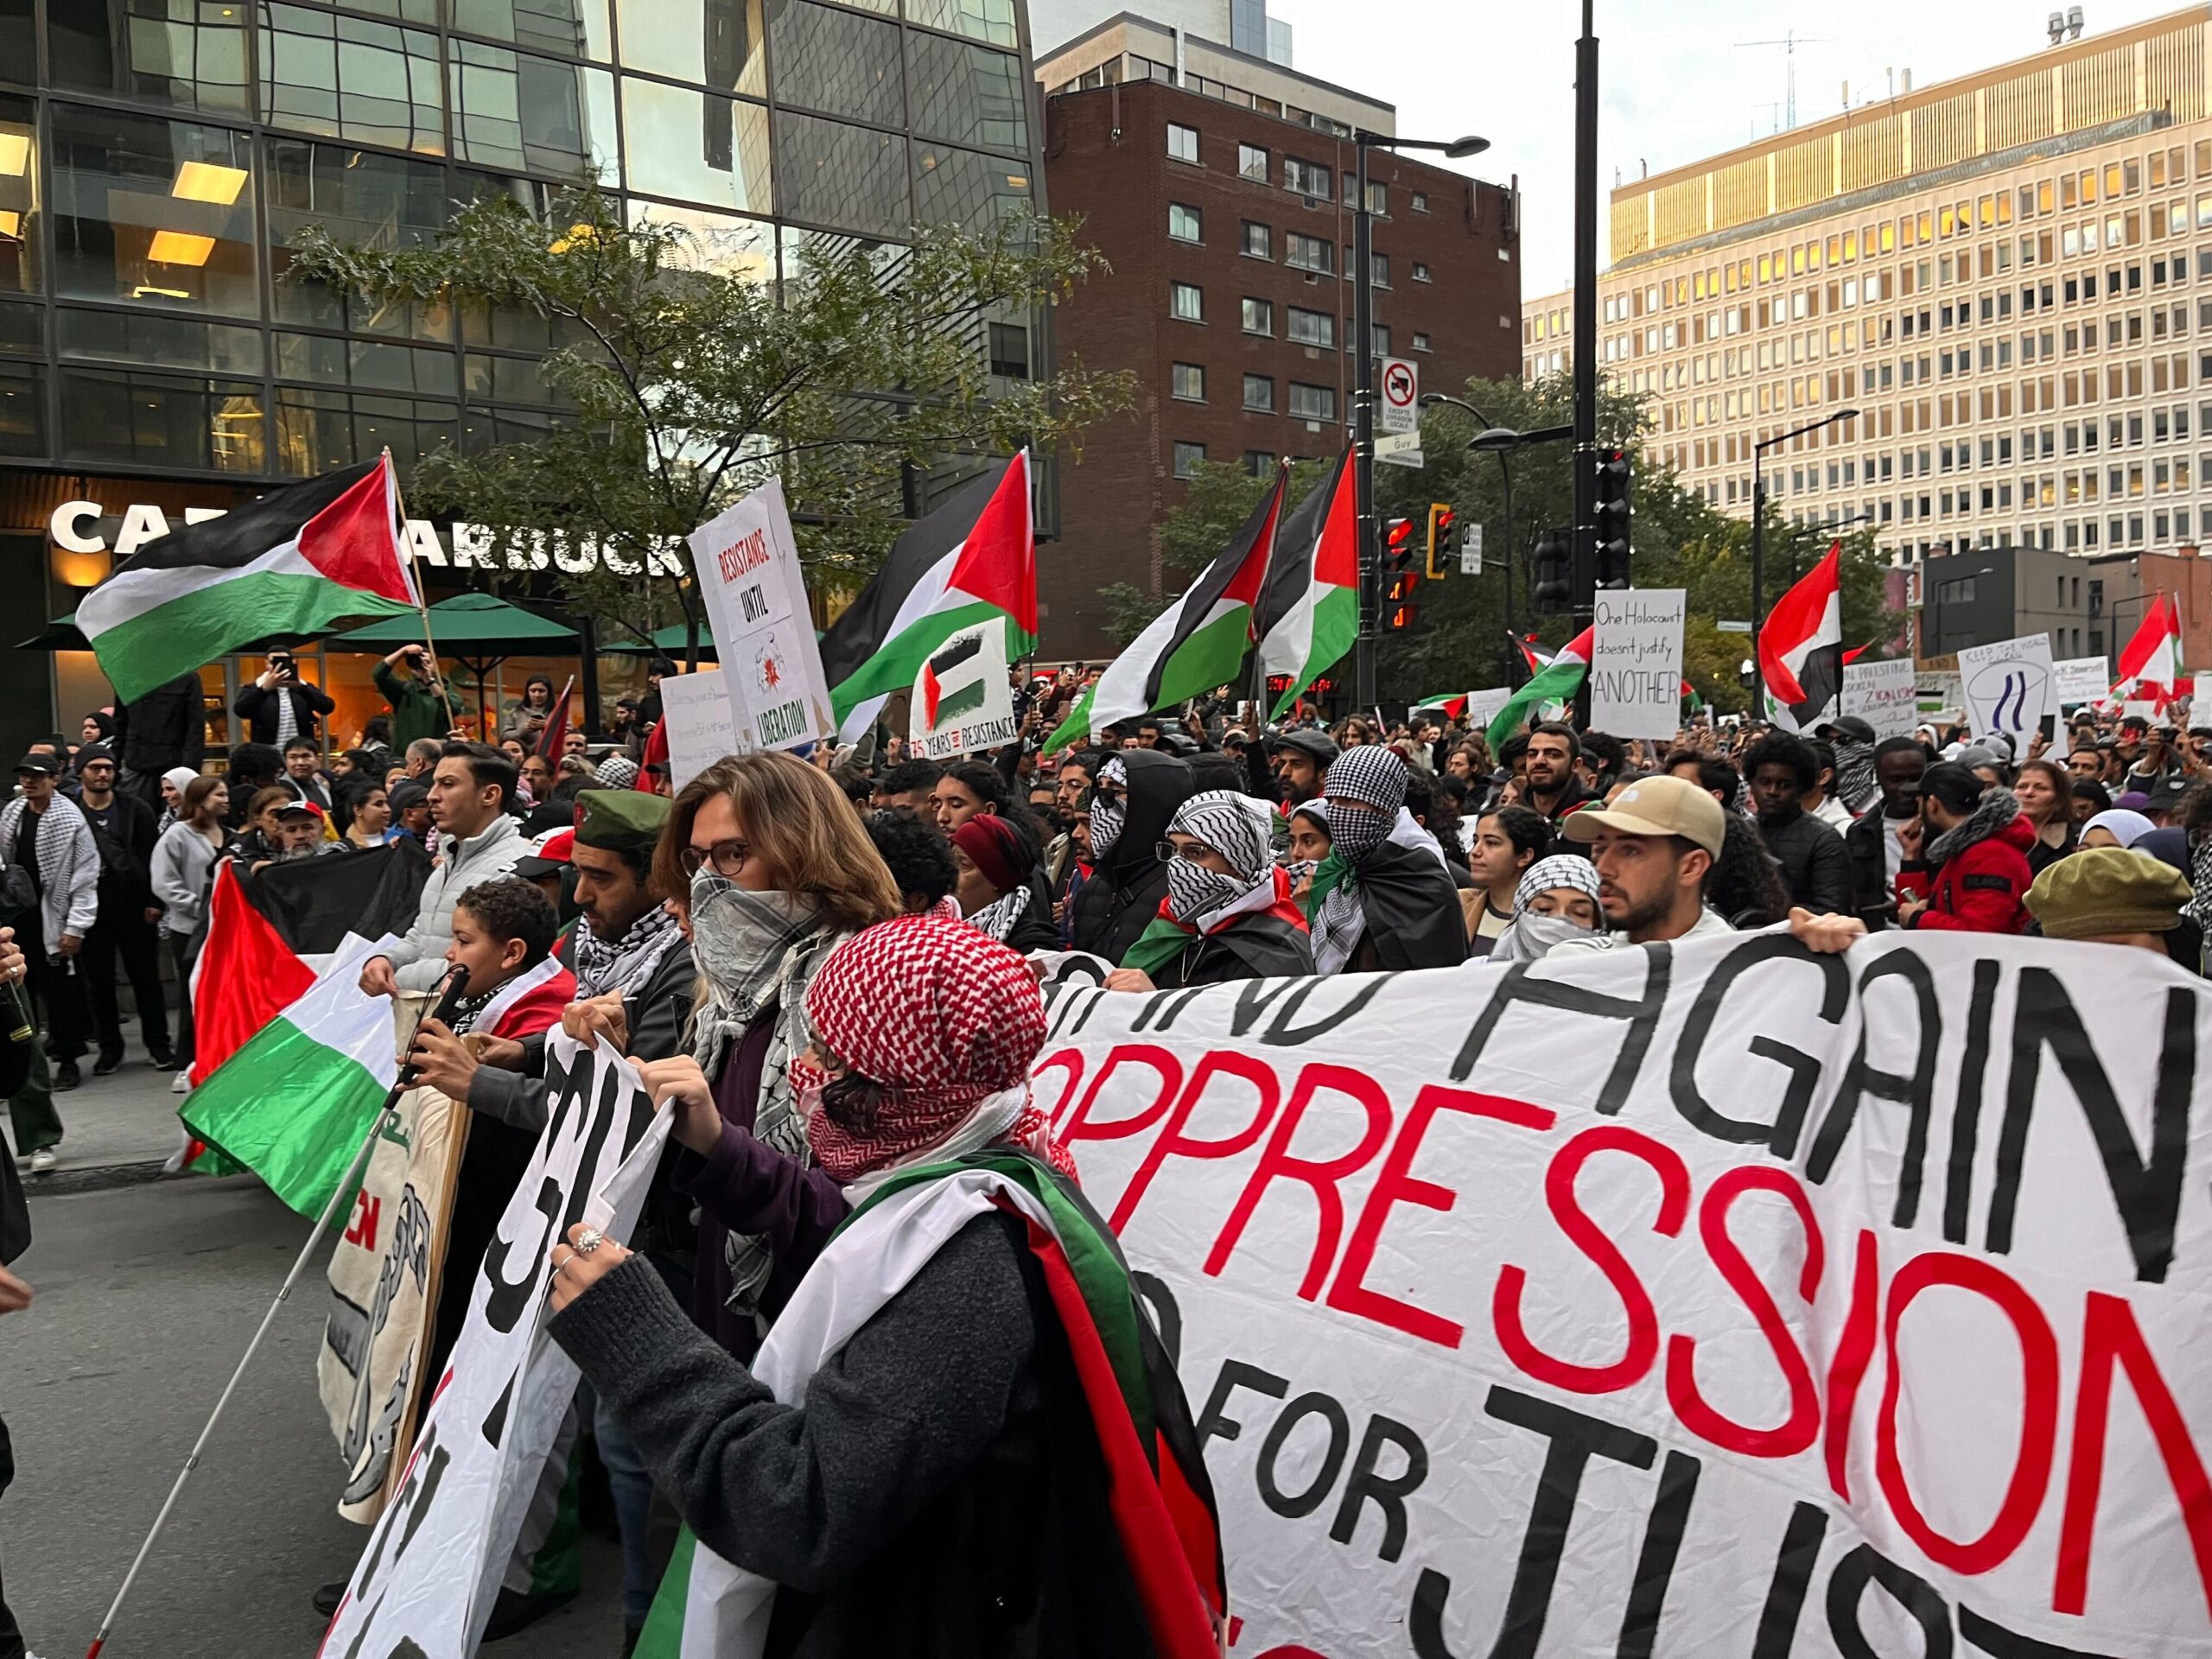 Protestors holding banners and Palestinian flags march on downtown Montreal streets.